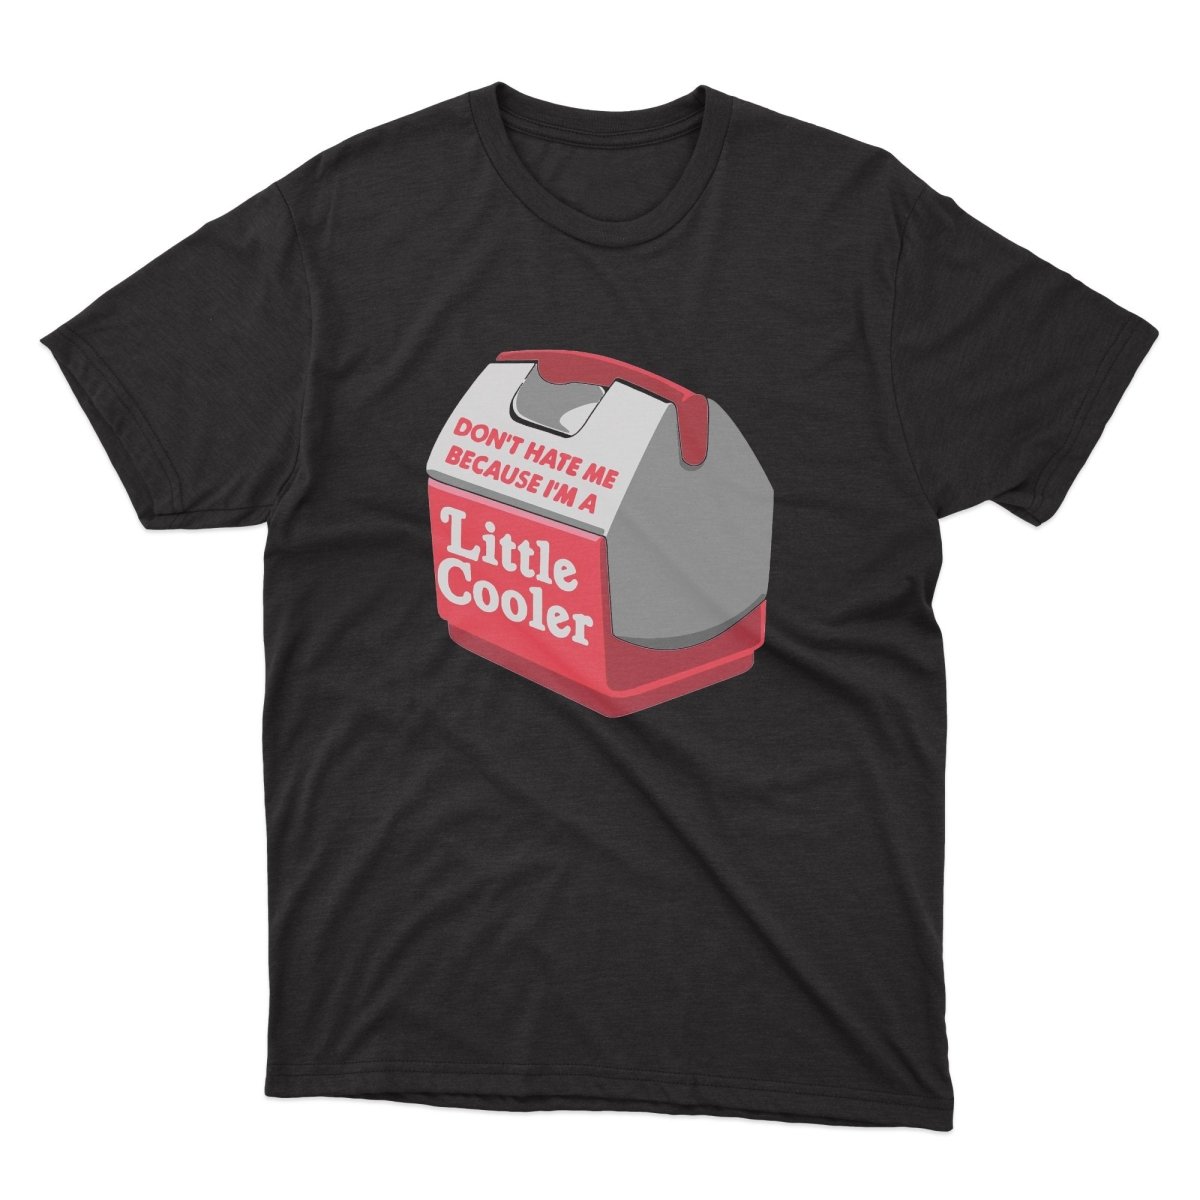 Don't Be Hate Me Because I'm A Little Cooler Shirt - stickerbullDon't Be Hate Me Because I'm A Little Cooler ShirtShirtsPrintifystickerbull59095899855791824721BlackSa black t - shirt with a little cooler on it